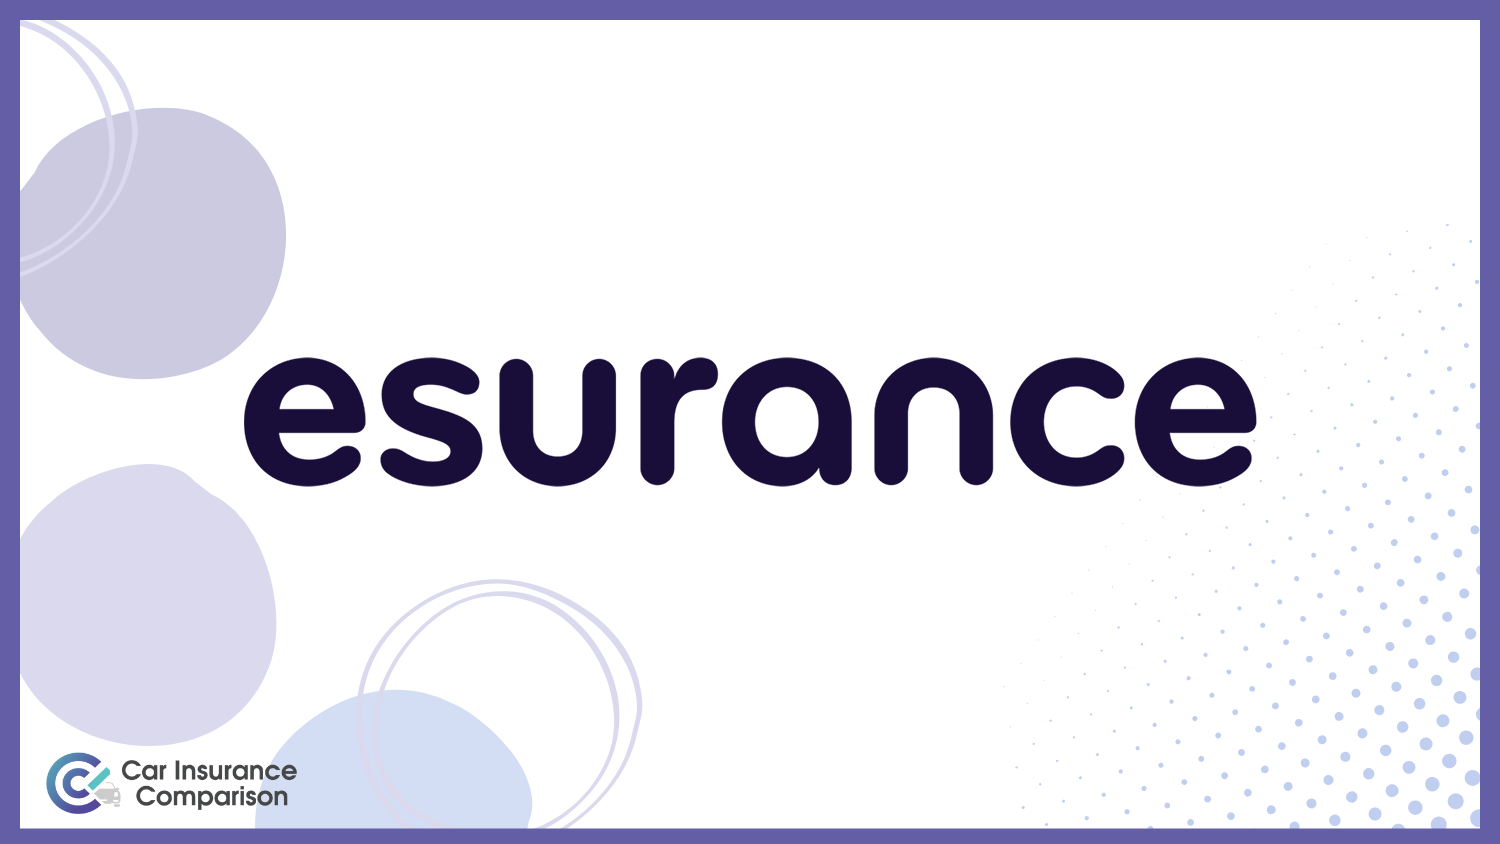 Esurance: Compare Car Insurance Rates for Epileptic Drivers